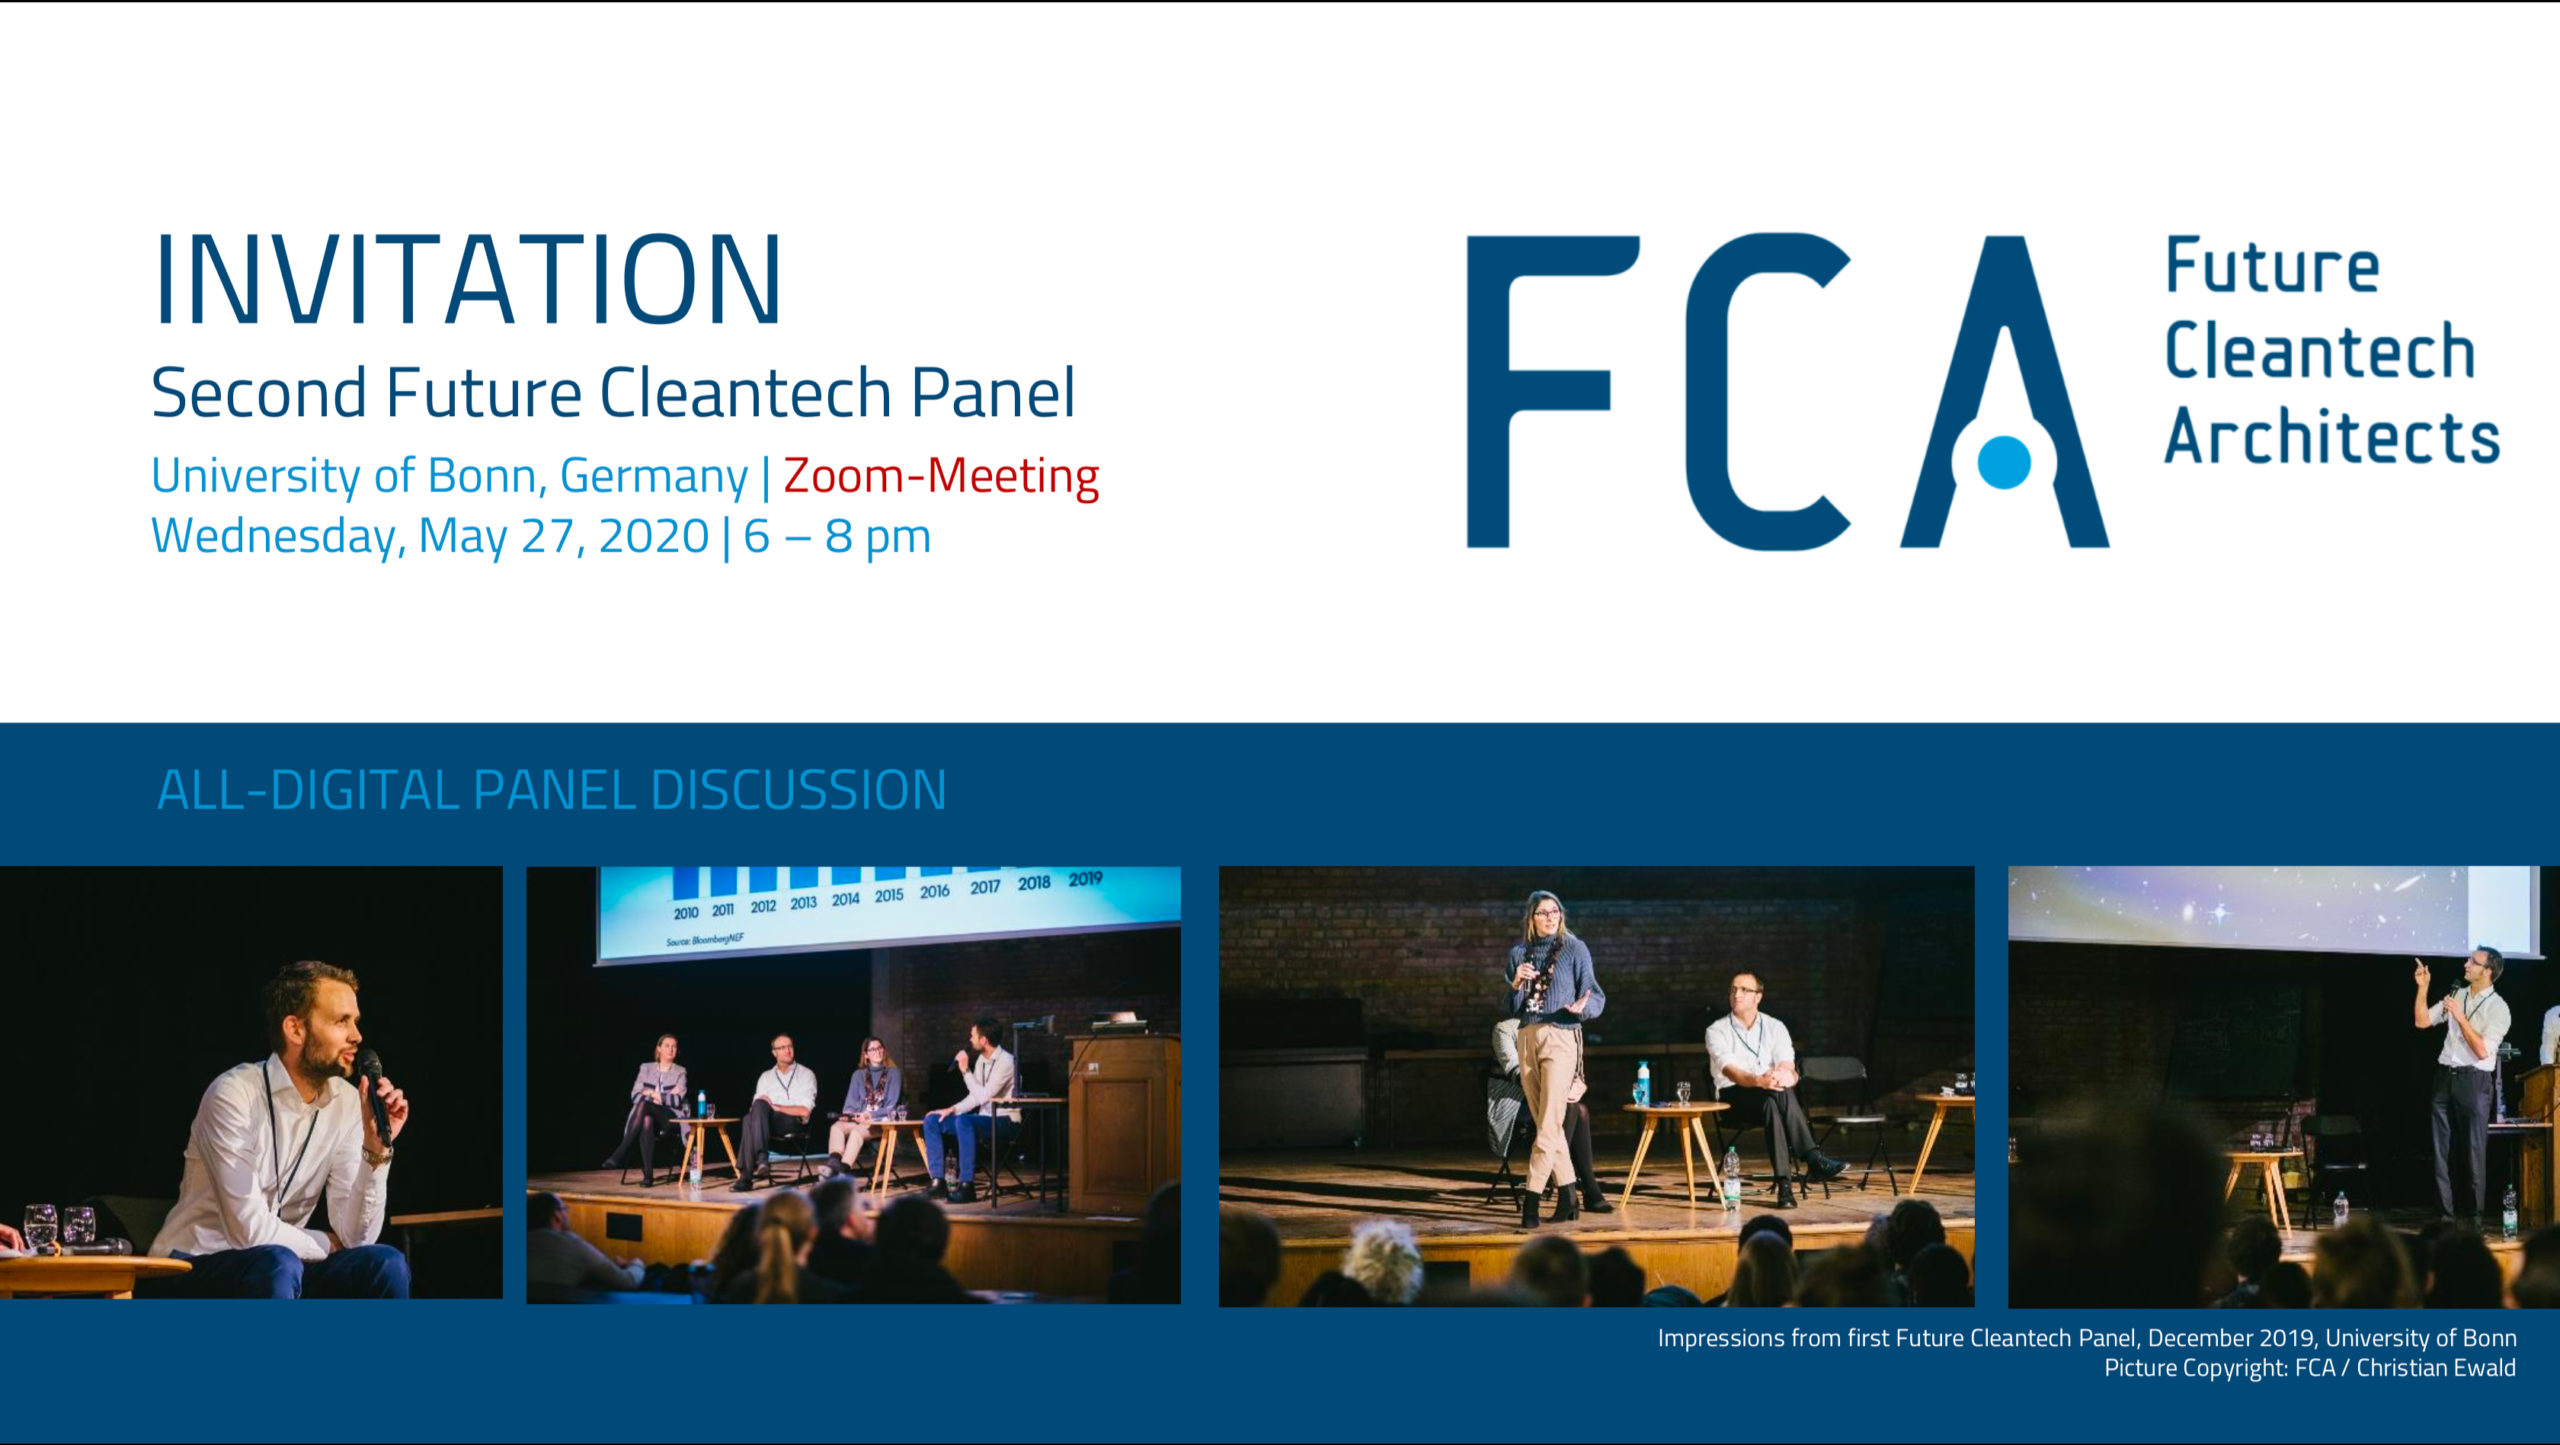 May 27, 6pm CET: Second Future Cleantech Panel